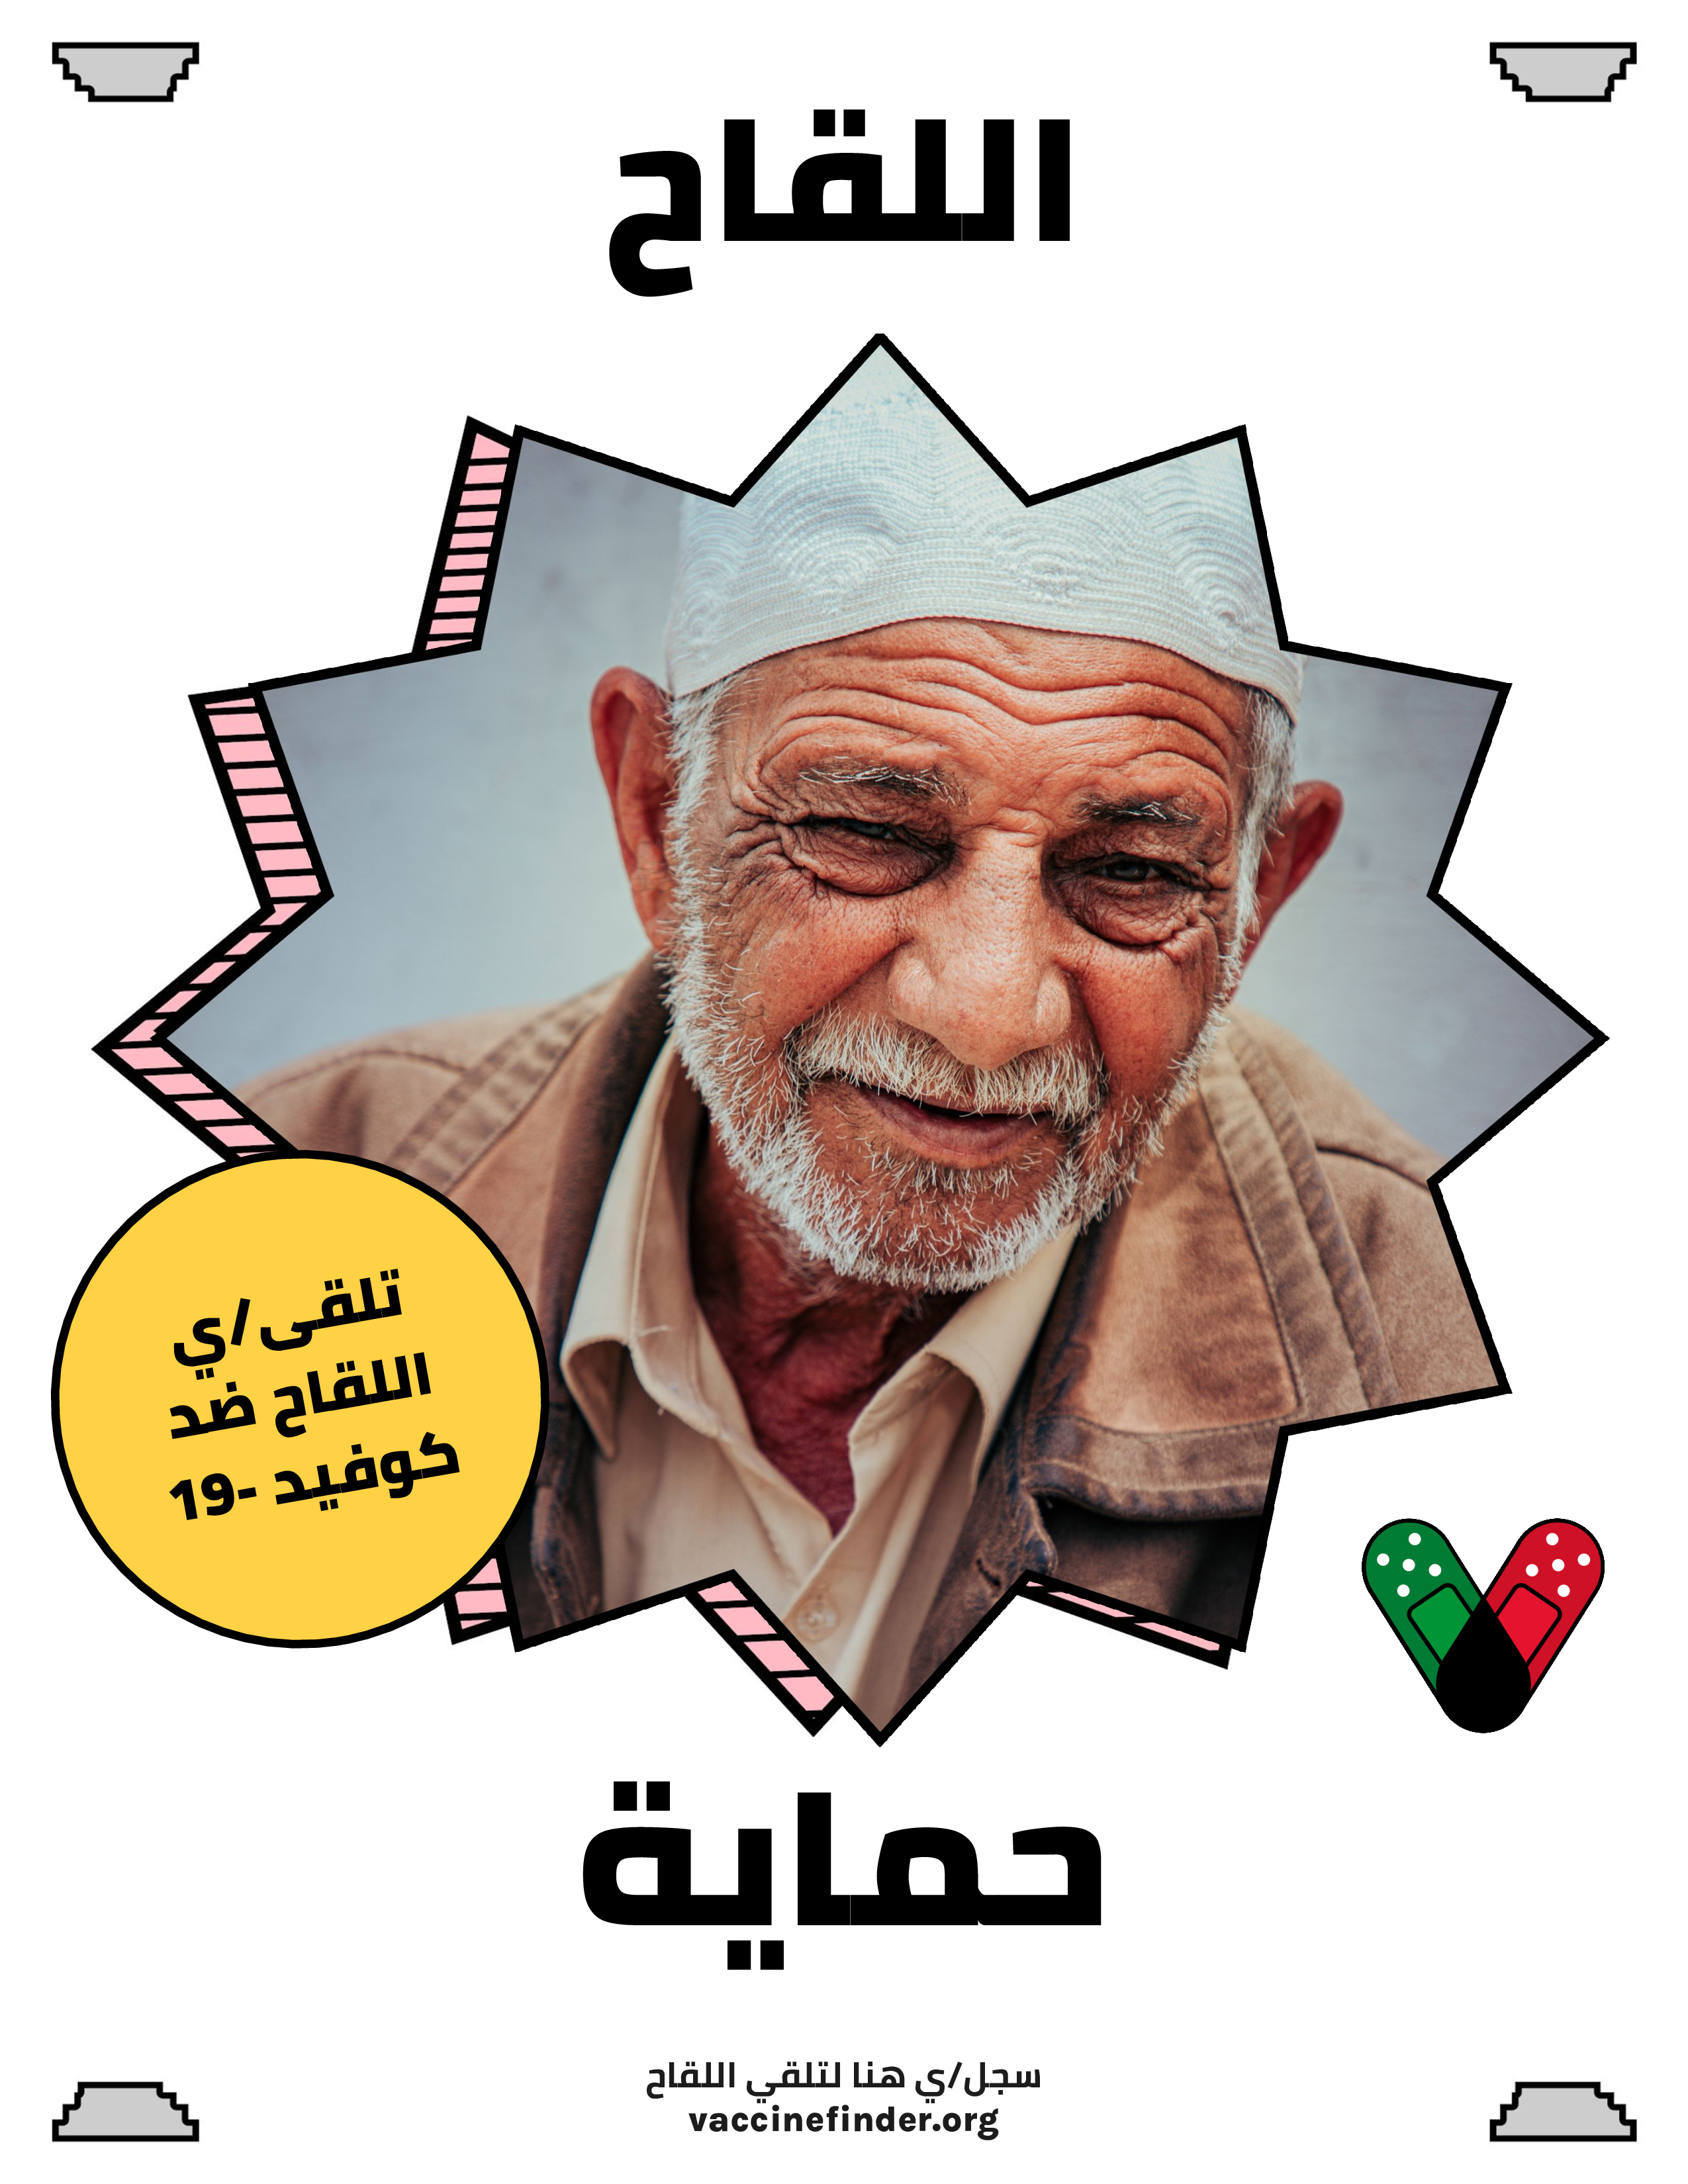 an older man smiling surrounded by the words "Vaccination is strength" in Arabic